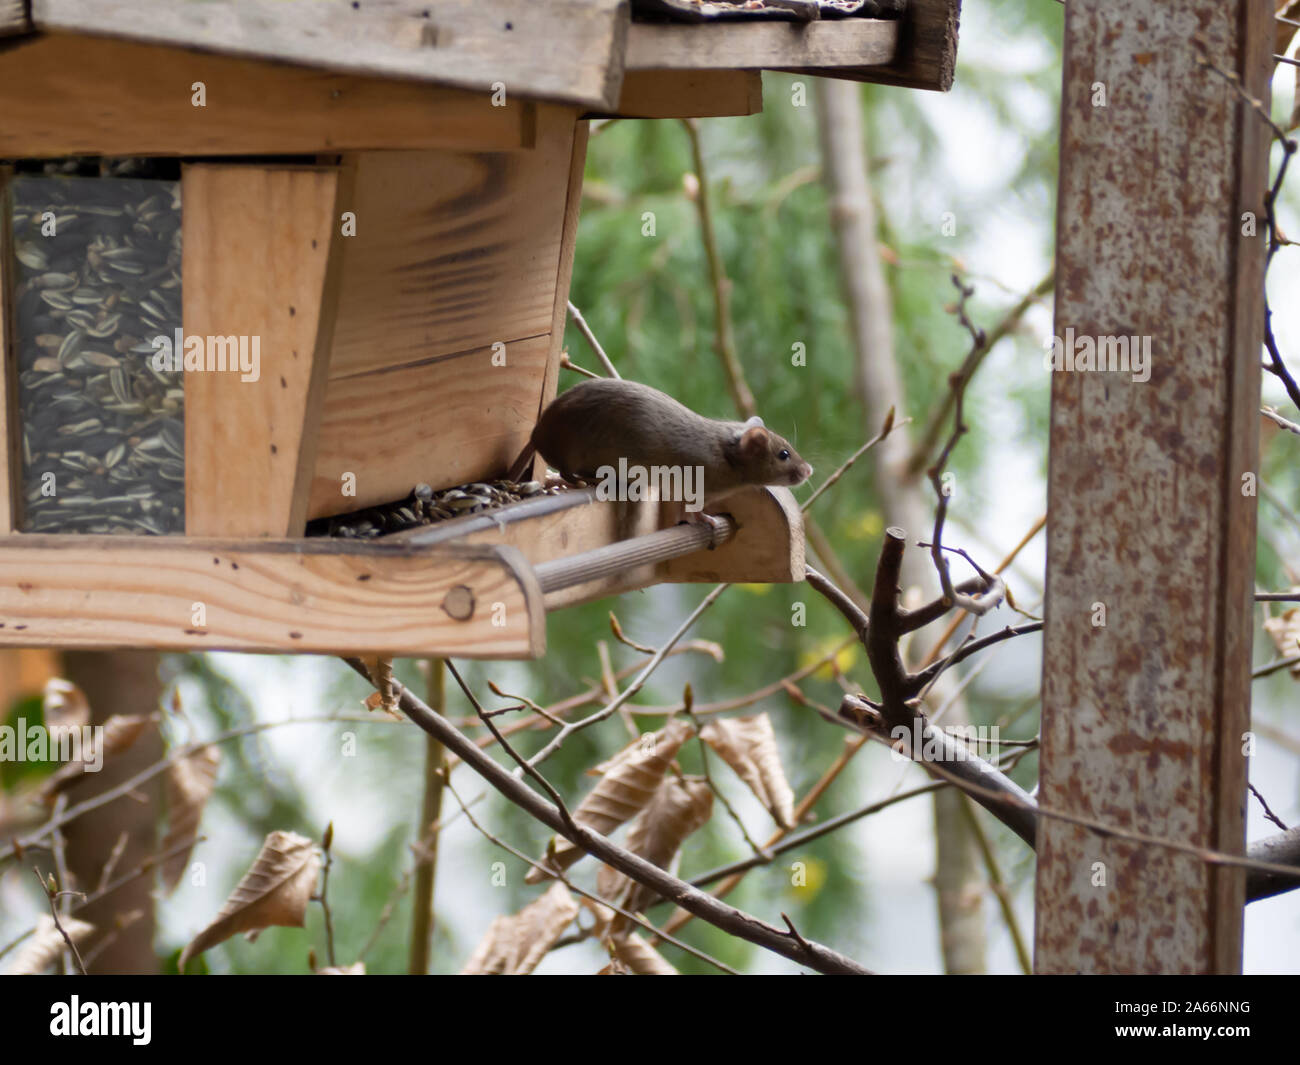 House mouse steals birdseed in a birdhouse Stock Photo